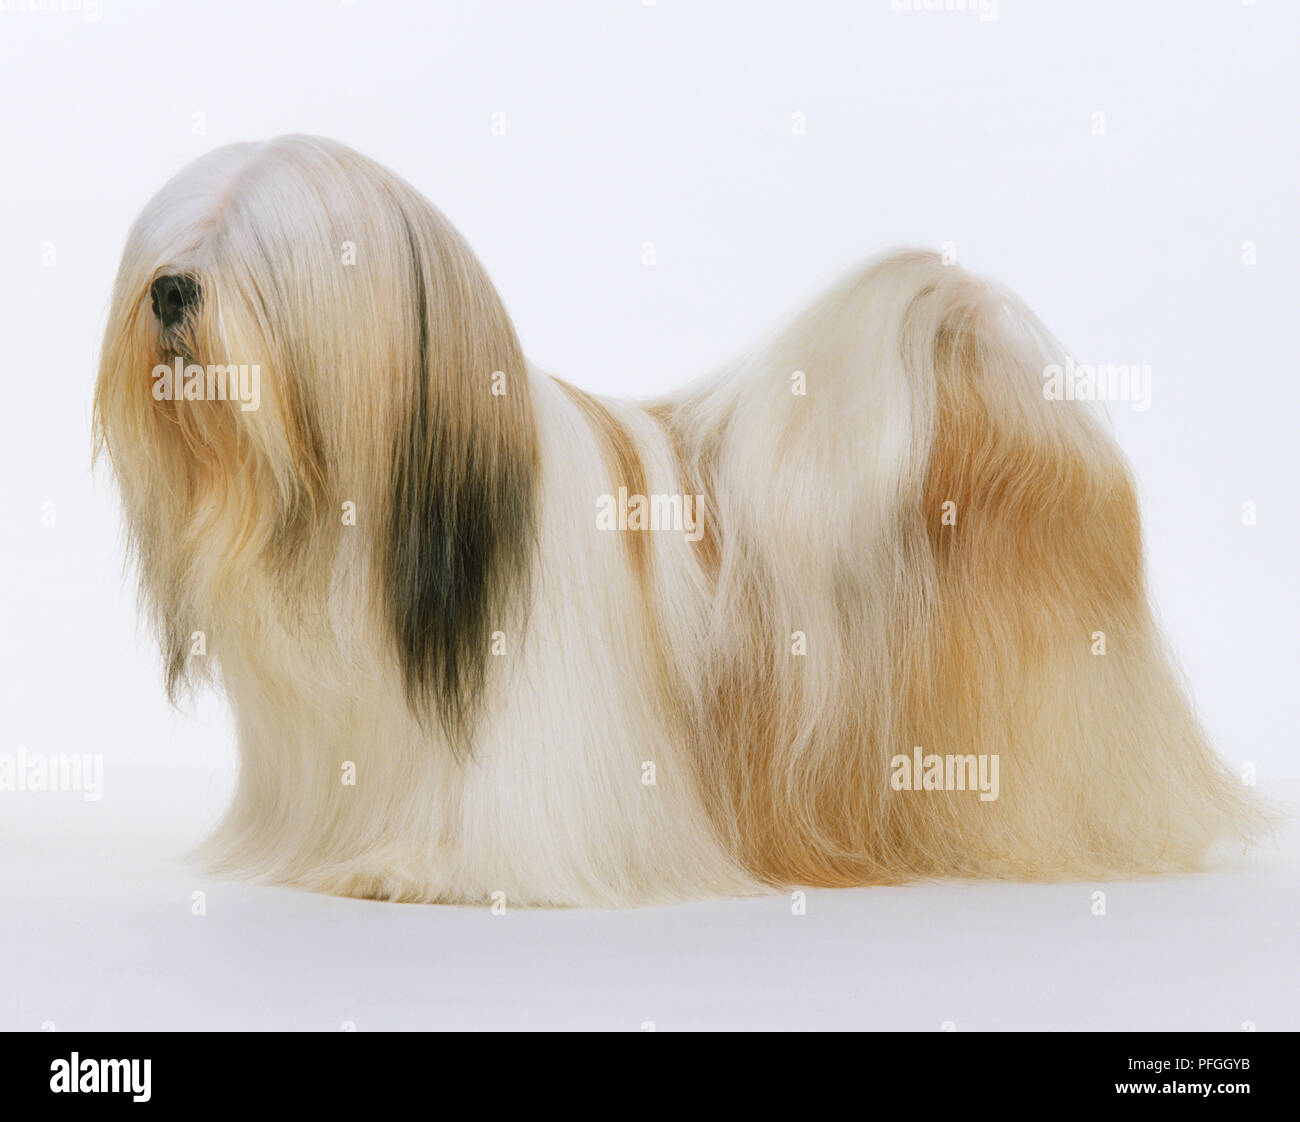 Lhasa Apso (Canis lupus familiaris), small dog covered in fine long brown and white hair, side view. Stock Photo